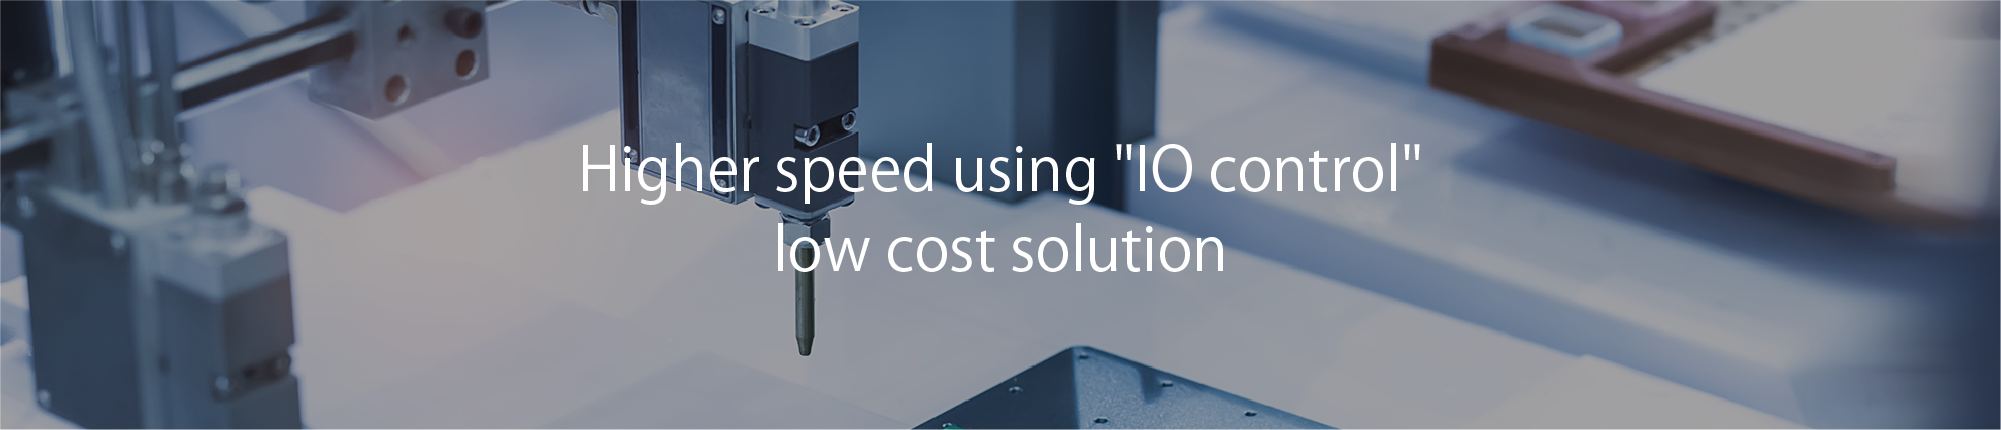 High-speed, low-cost solution utilizing IO control